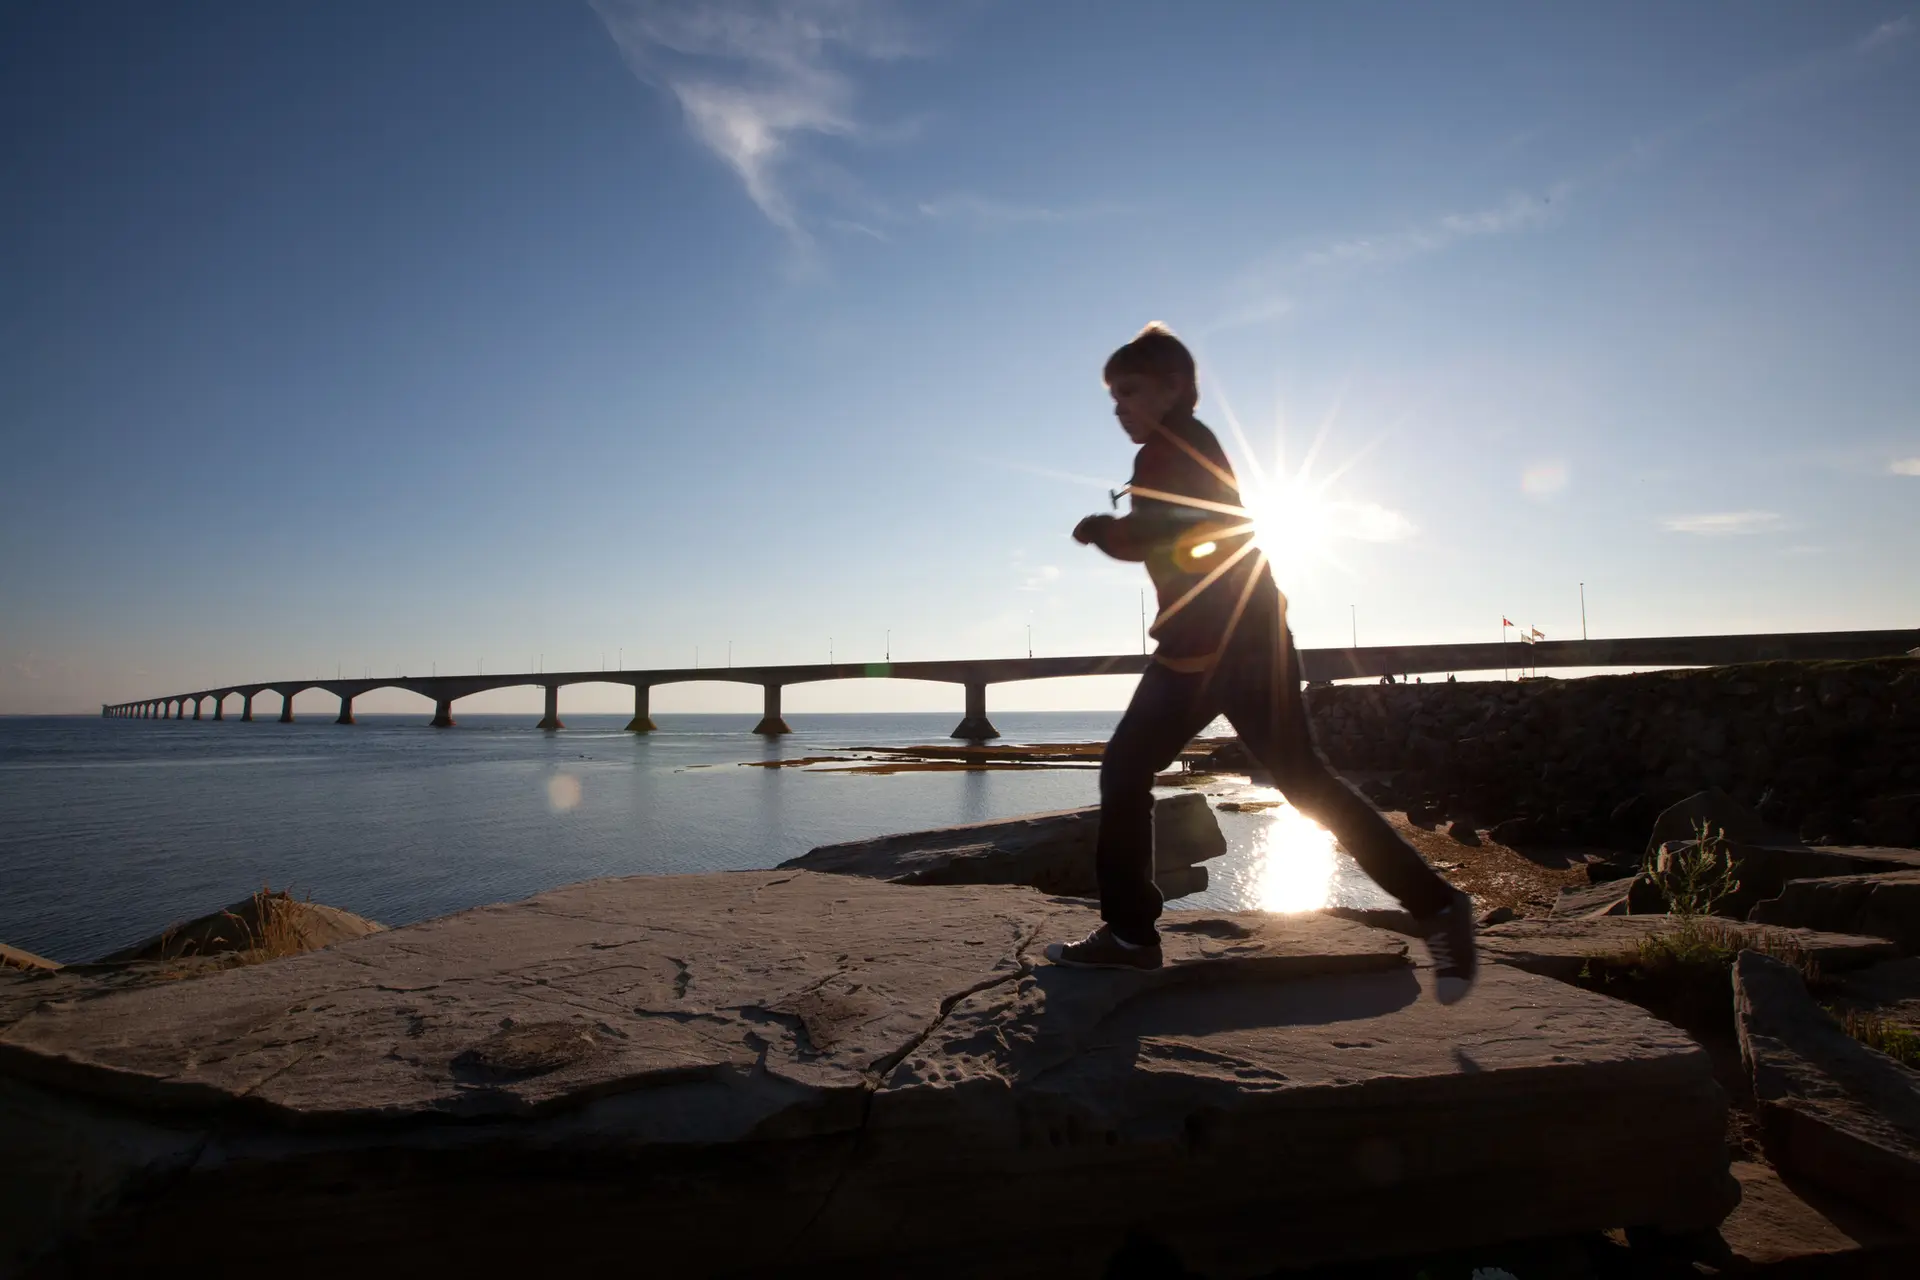 A young kid runs on the rocks under the Confederation Bridge in Prince Edward Island